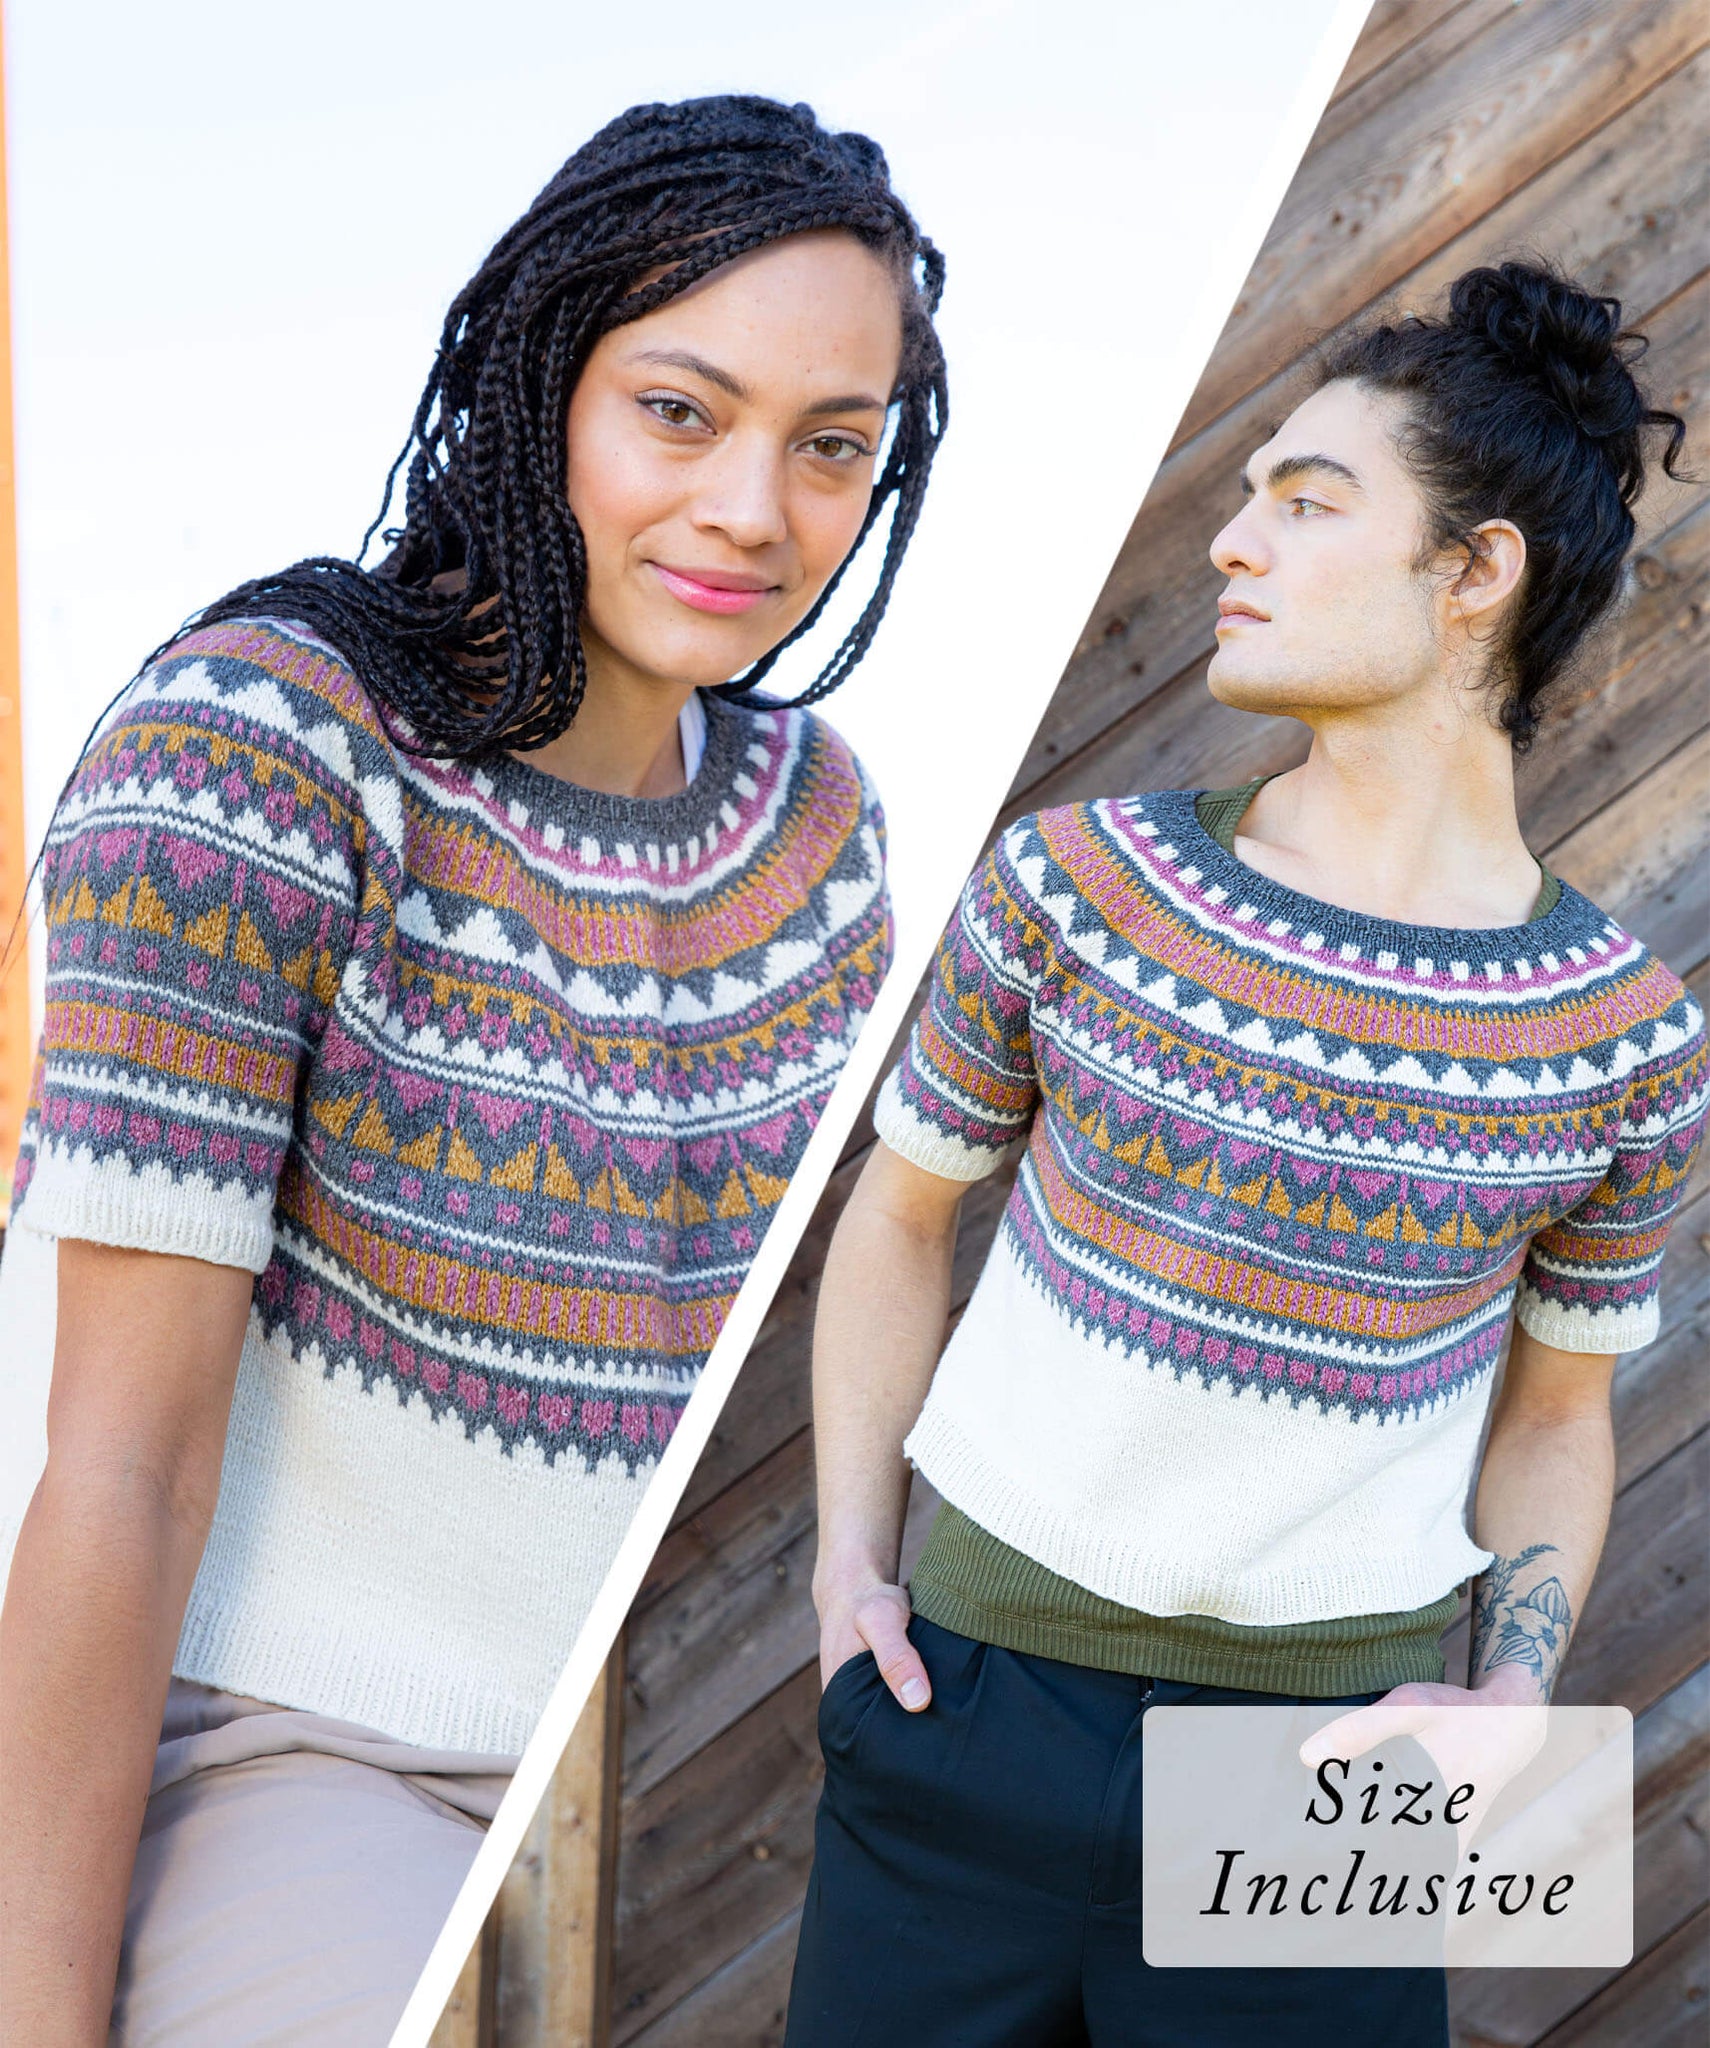 Mesic Sweater | Knitting Pattern by Stephanie Lotven